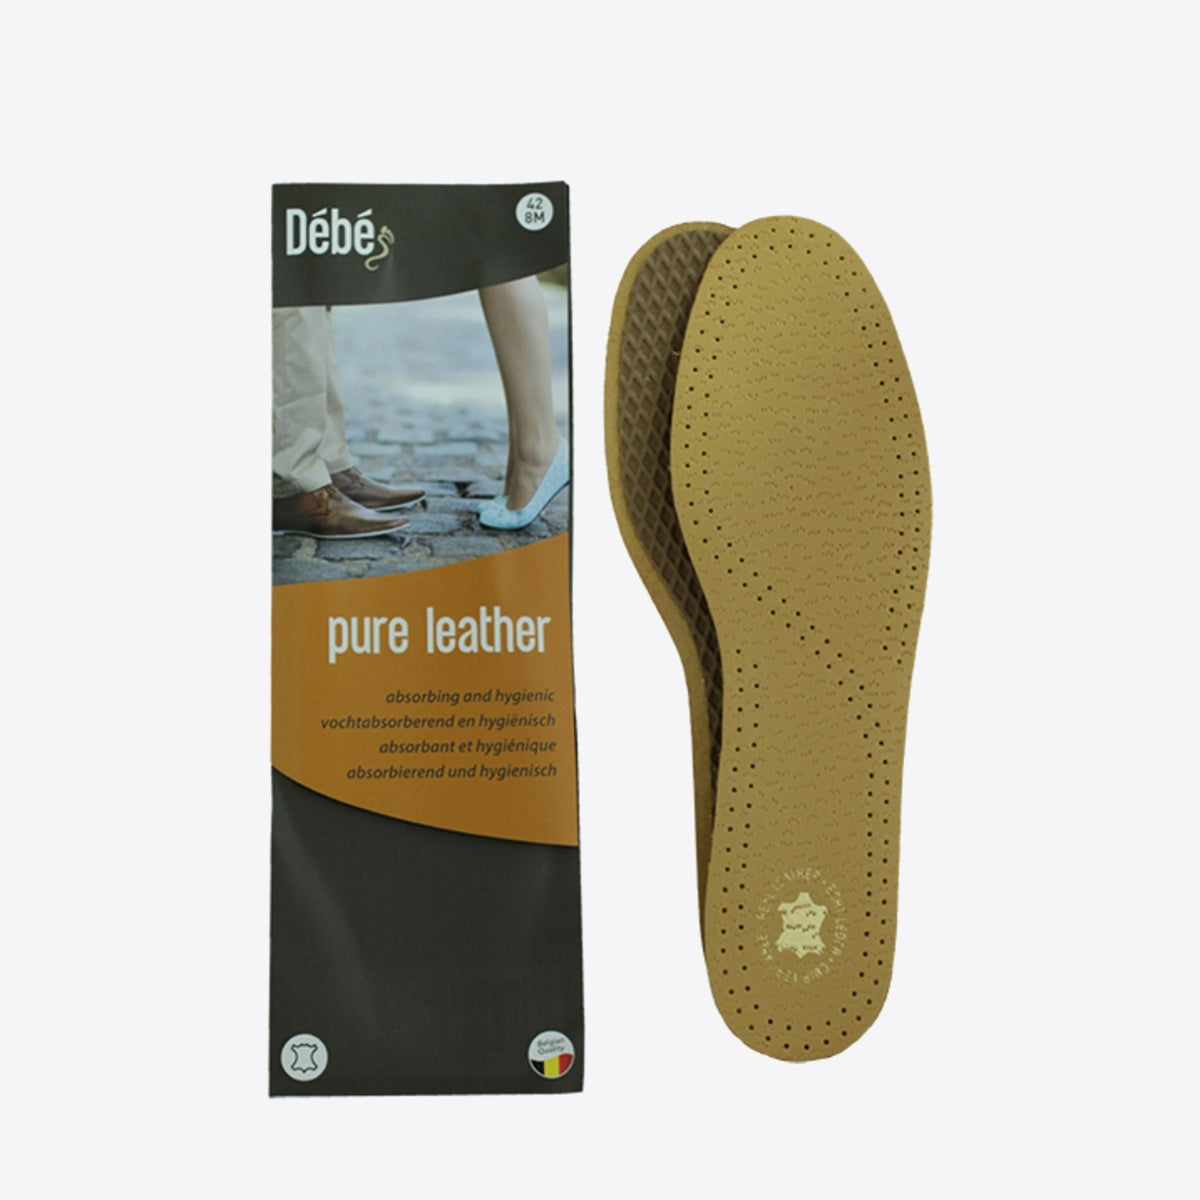 FOOTCOM DEBE Pure Leather Insole Brown - Image 2